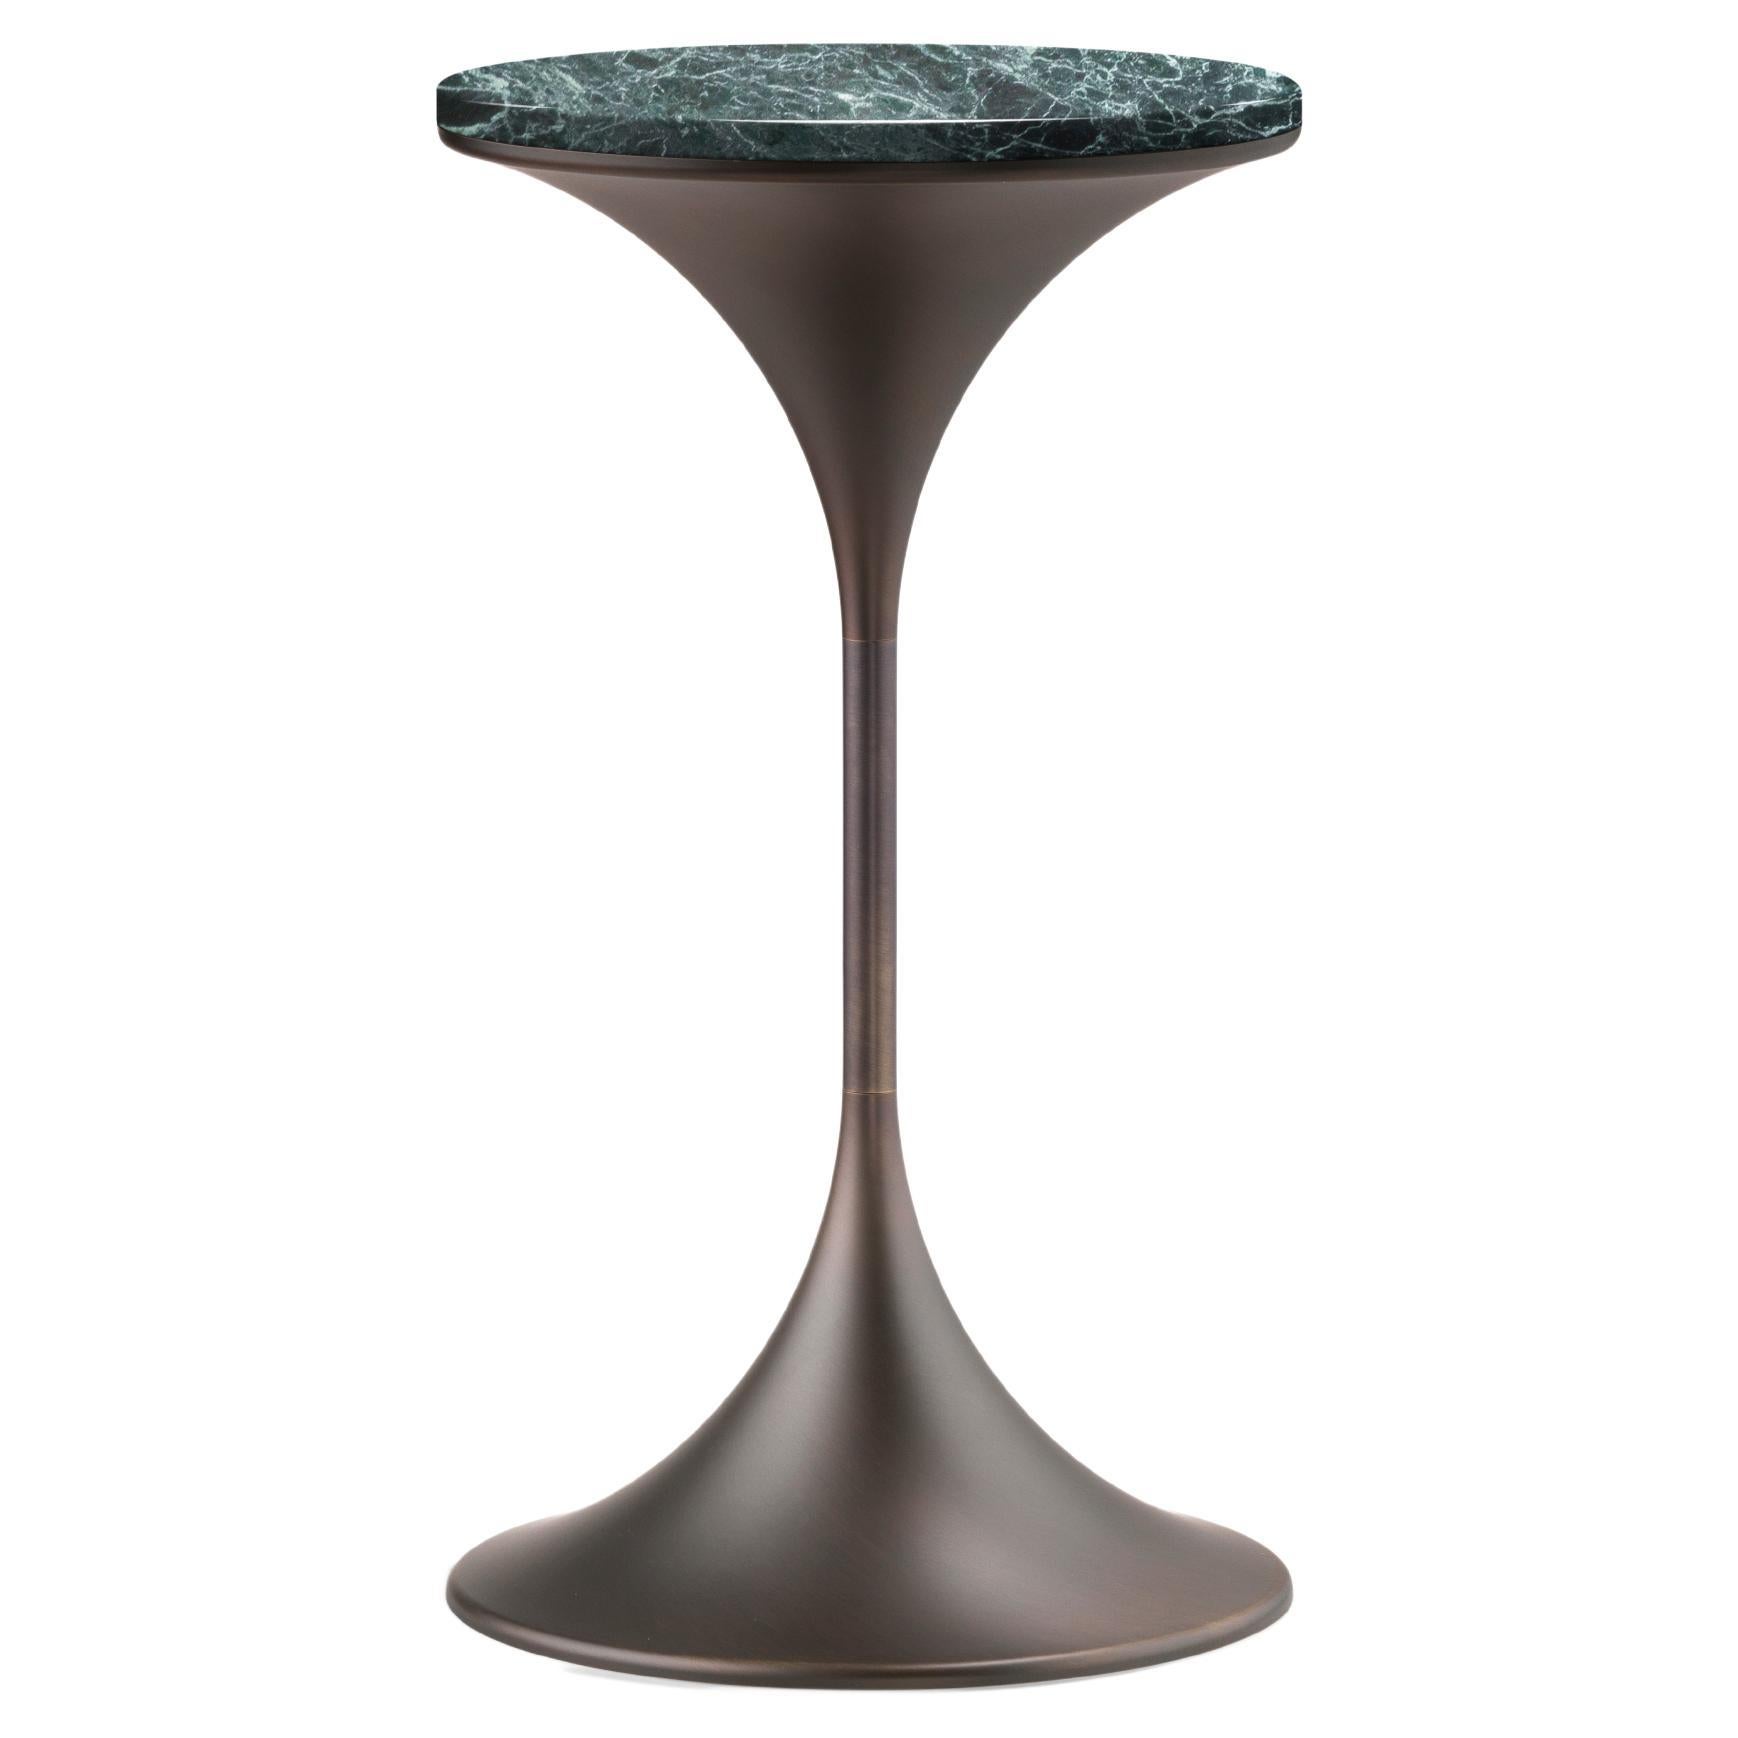 Dapertutto Tall Table, Verde Alpi Top, Burnished Brass , Made in Italy